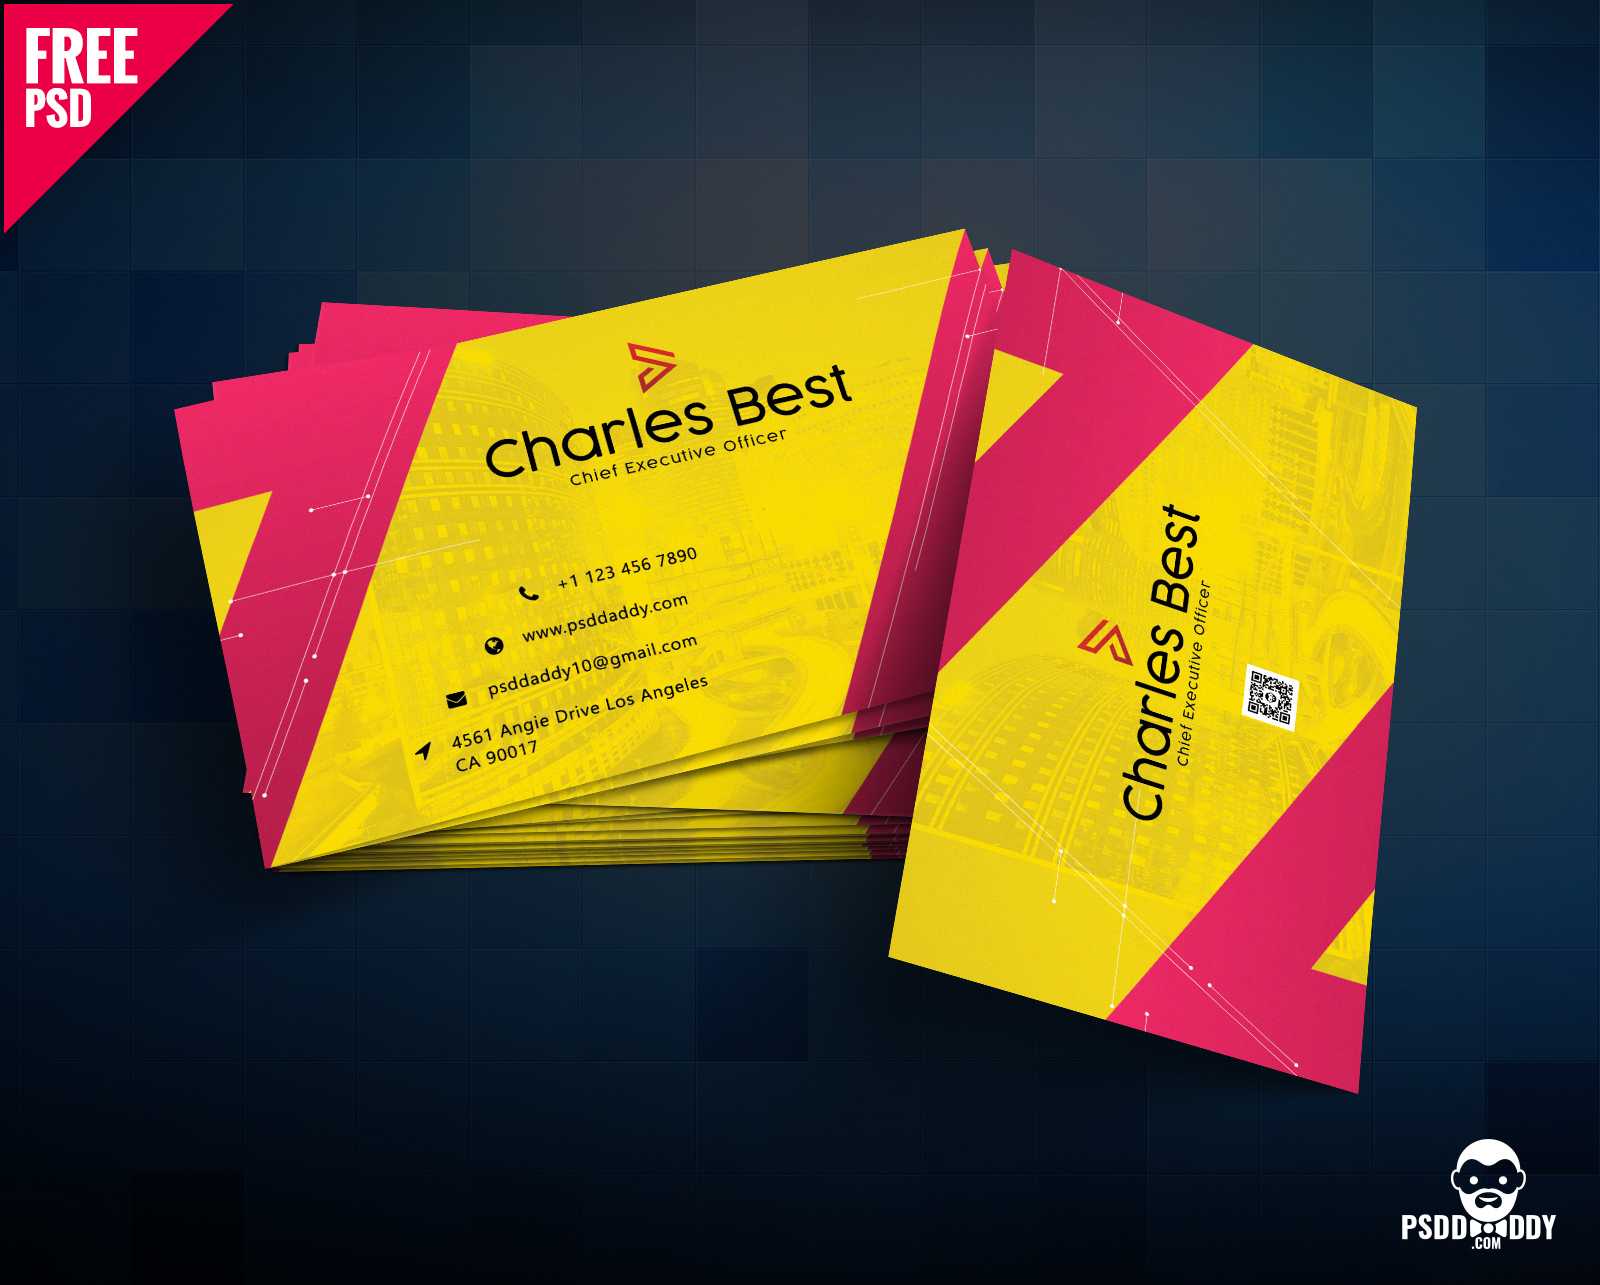 Download] Creative Business Card Free Psd | Psddaddy For Iphone Business Card Template